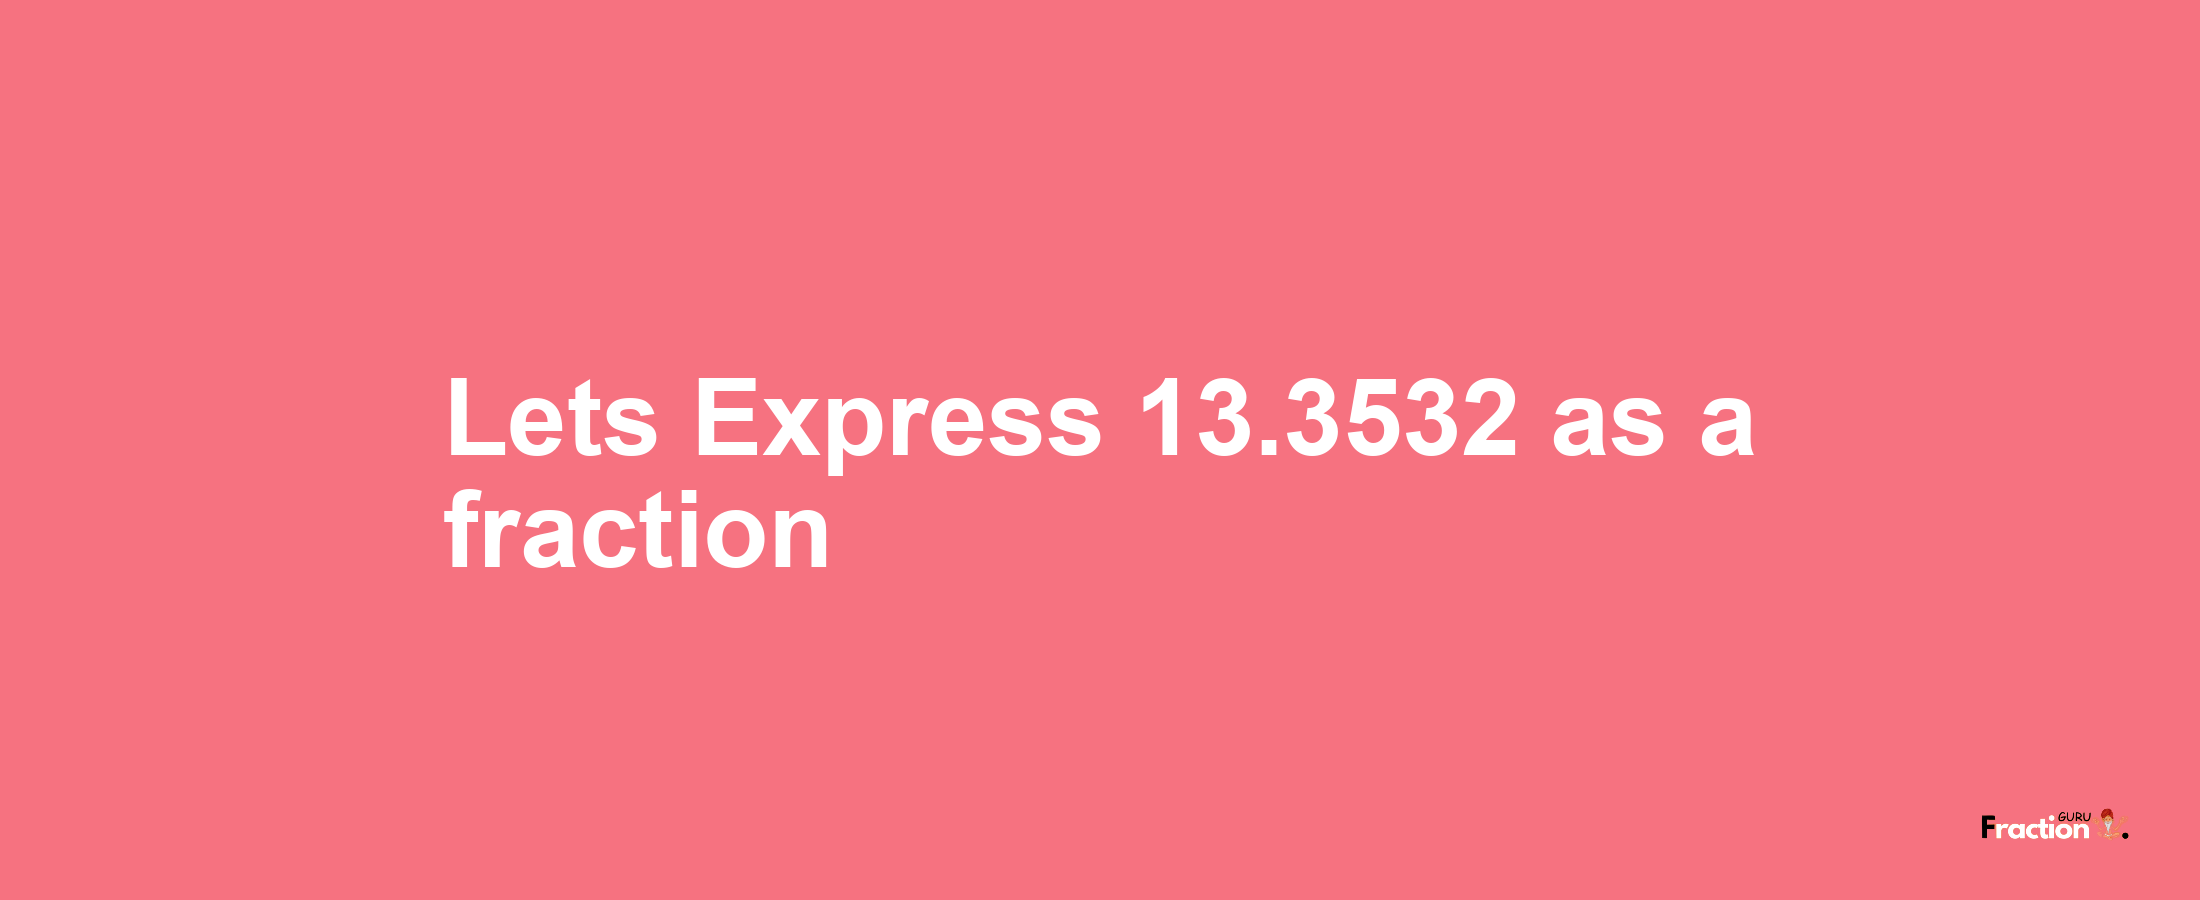 Lets Express 13.3532 as afraction